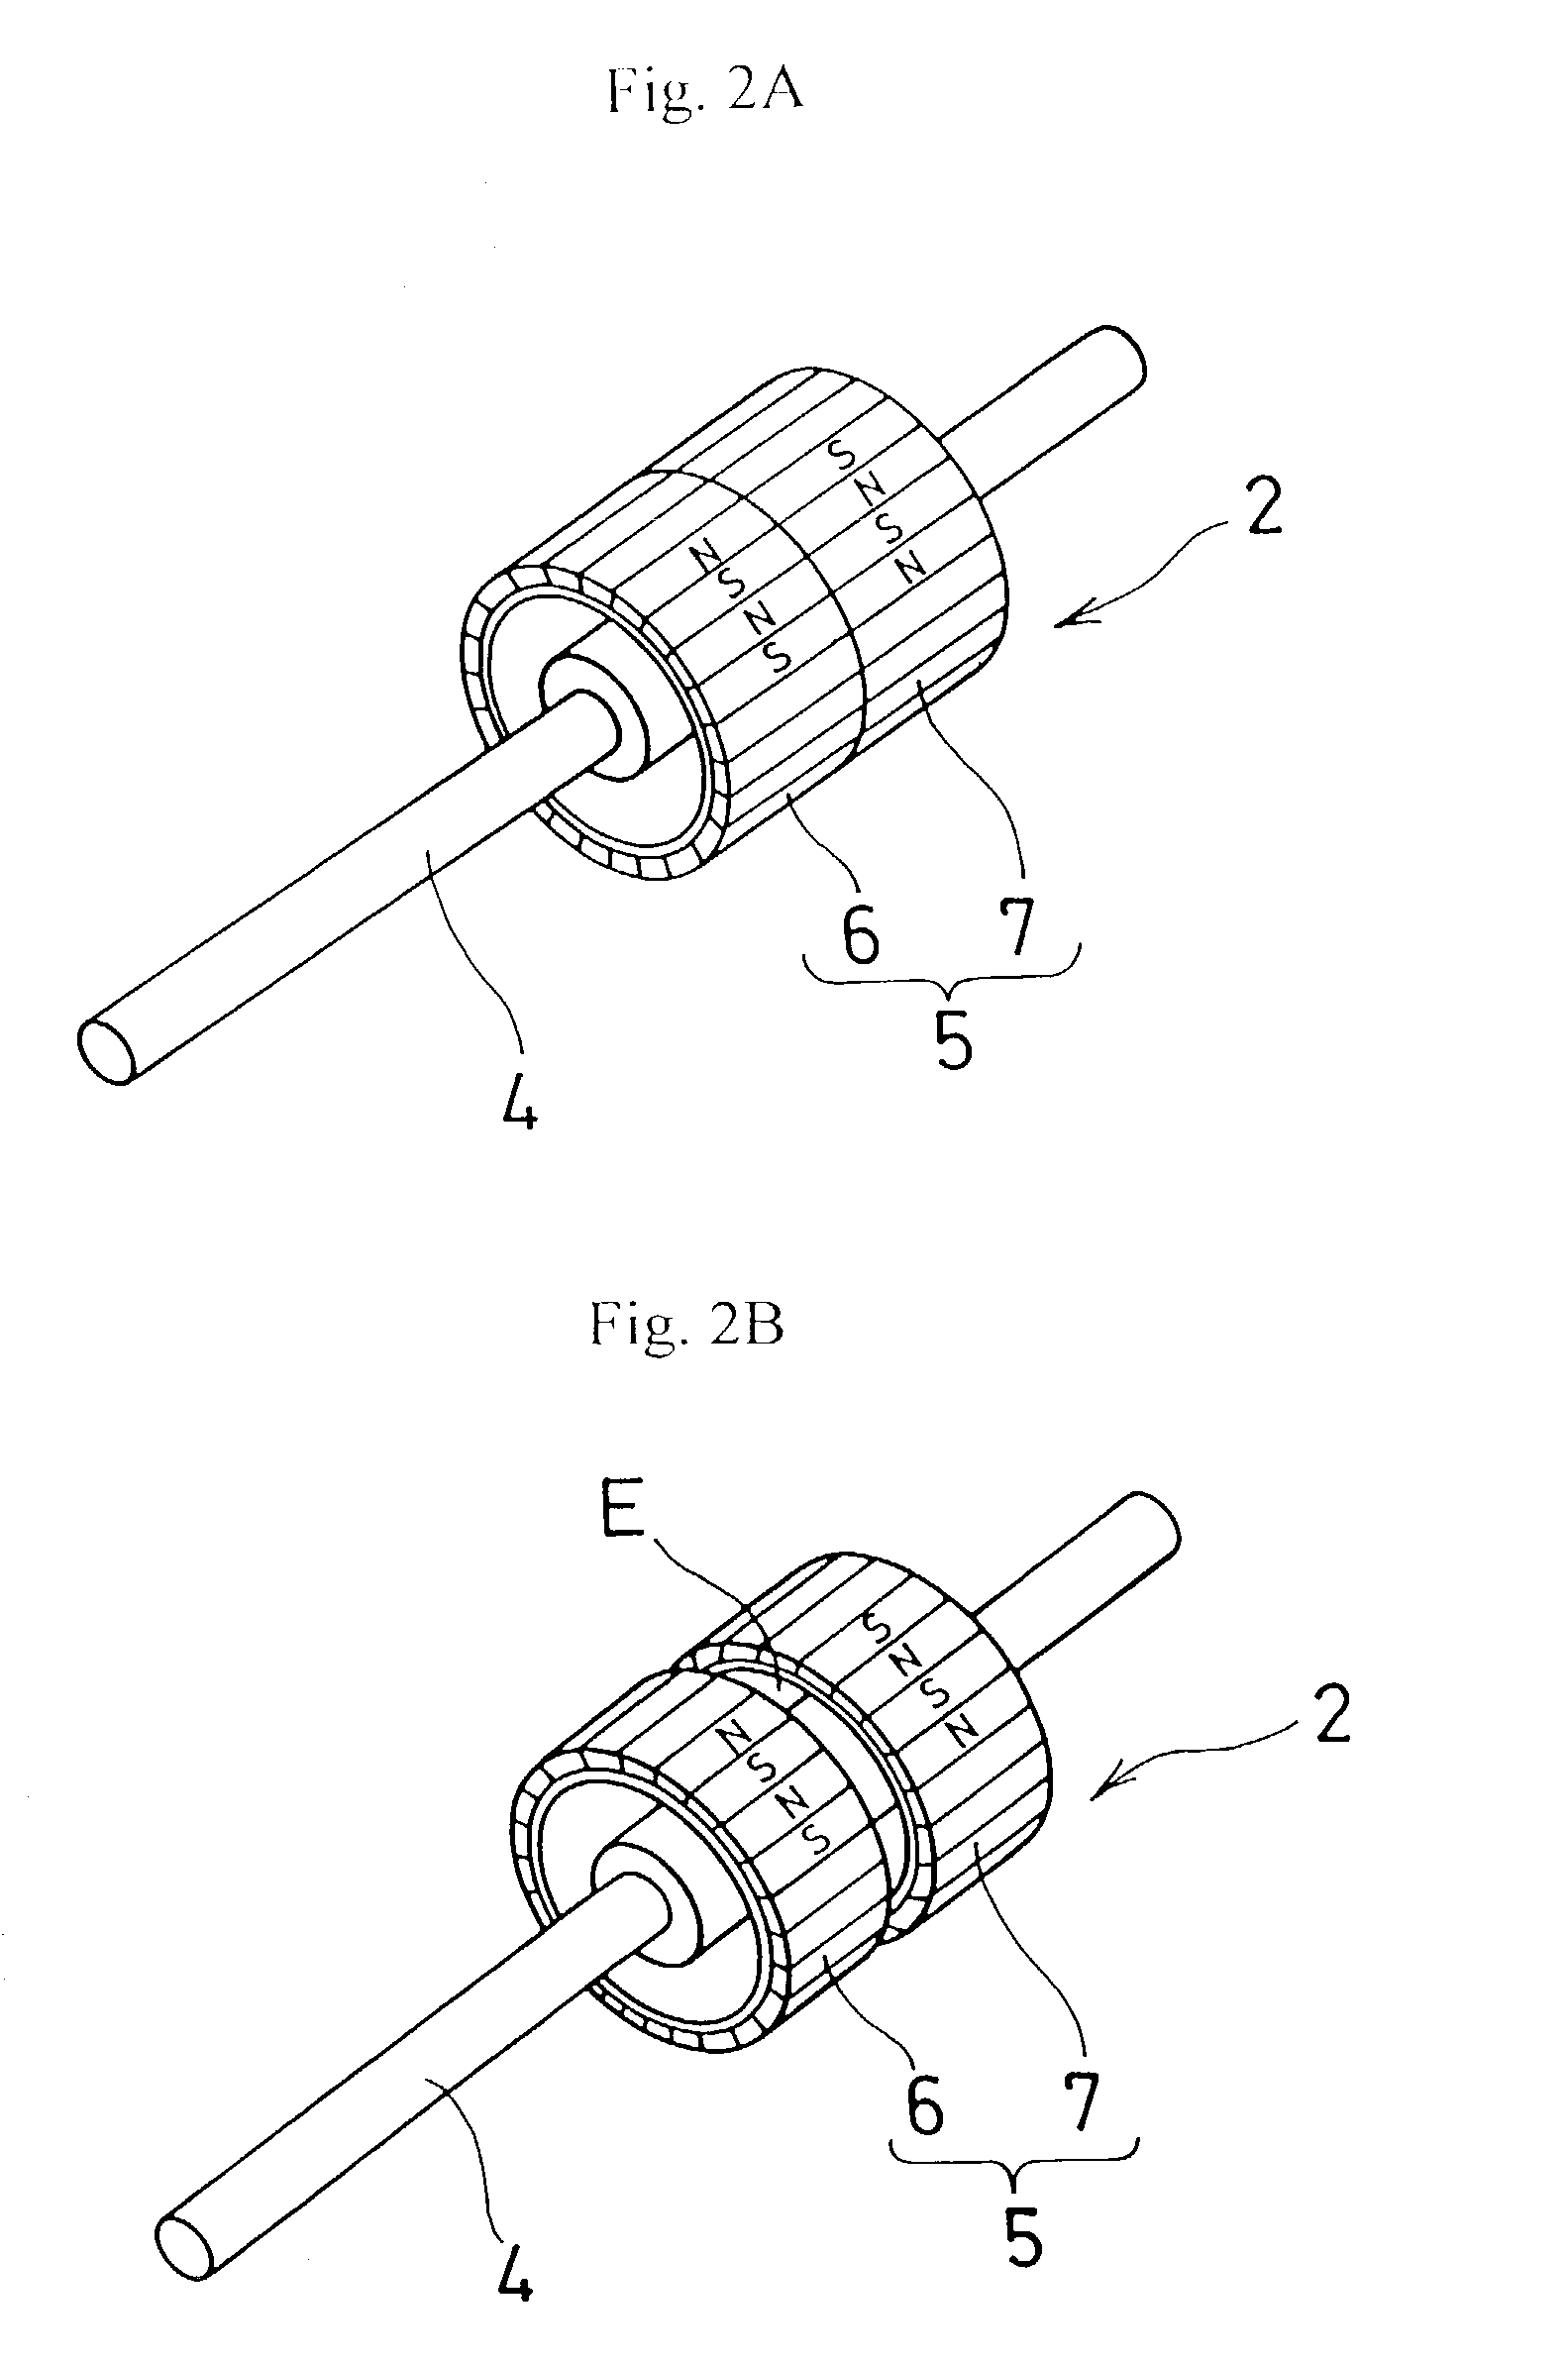 Structure of rotors in stepping motors